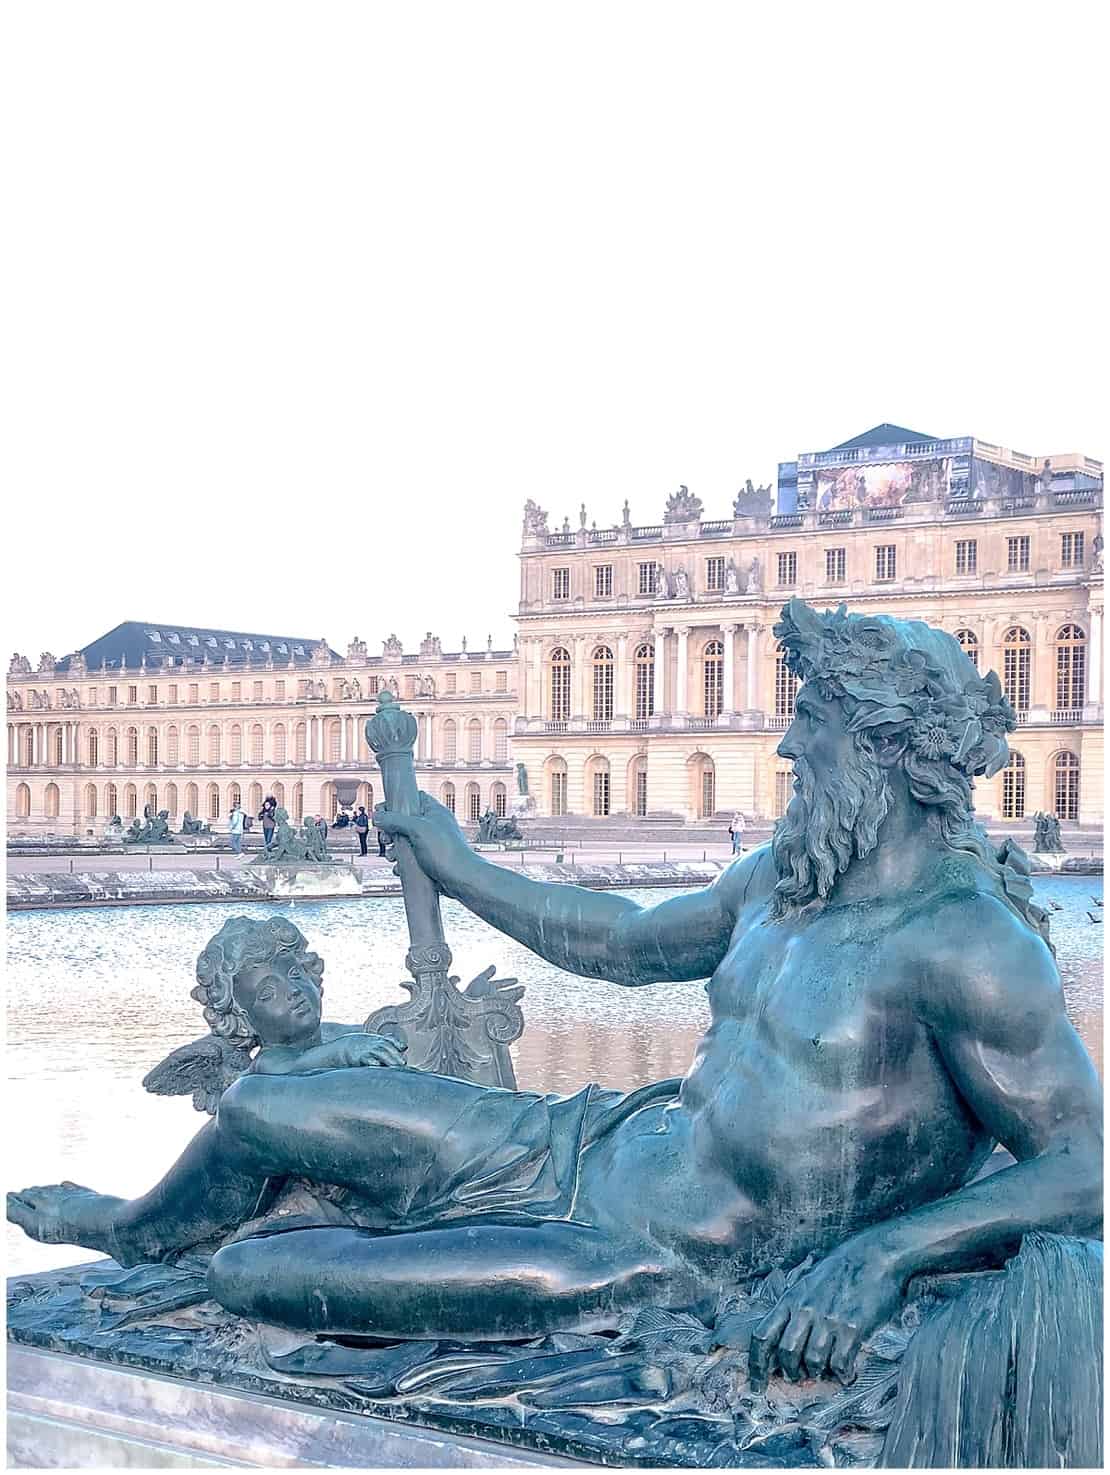 Versailles day trip from Paris - Neptune reclining in front of Palace of Versailles